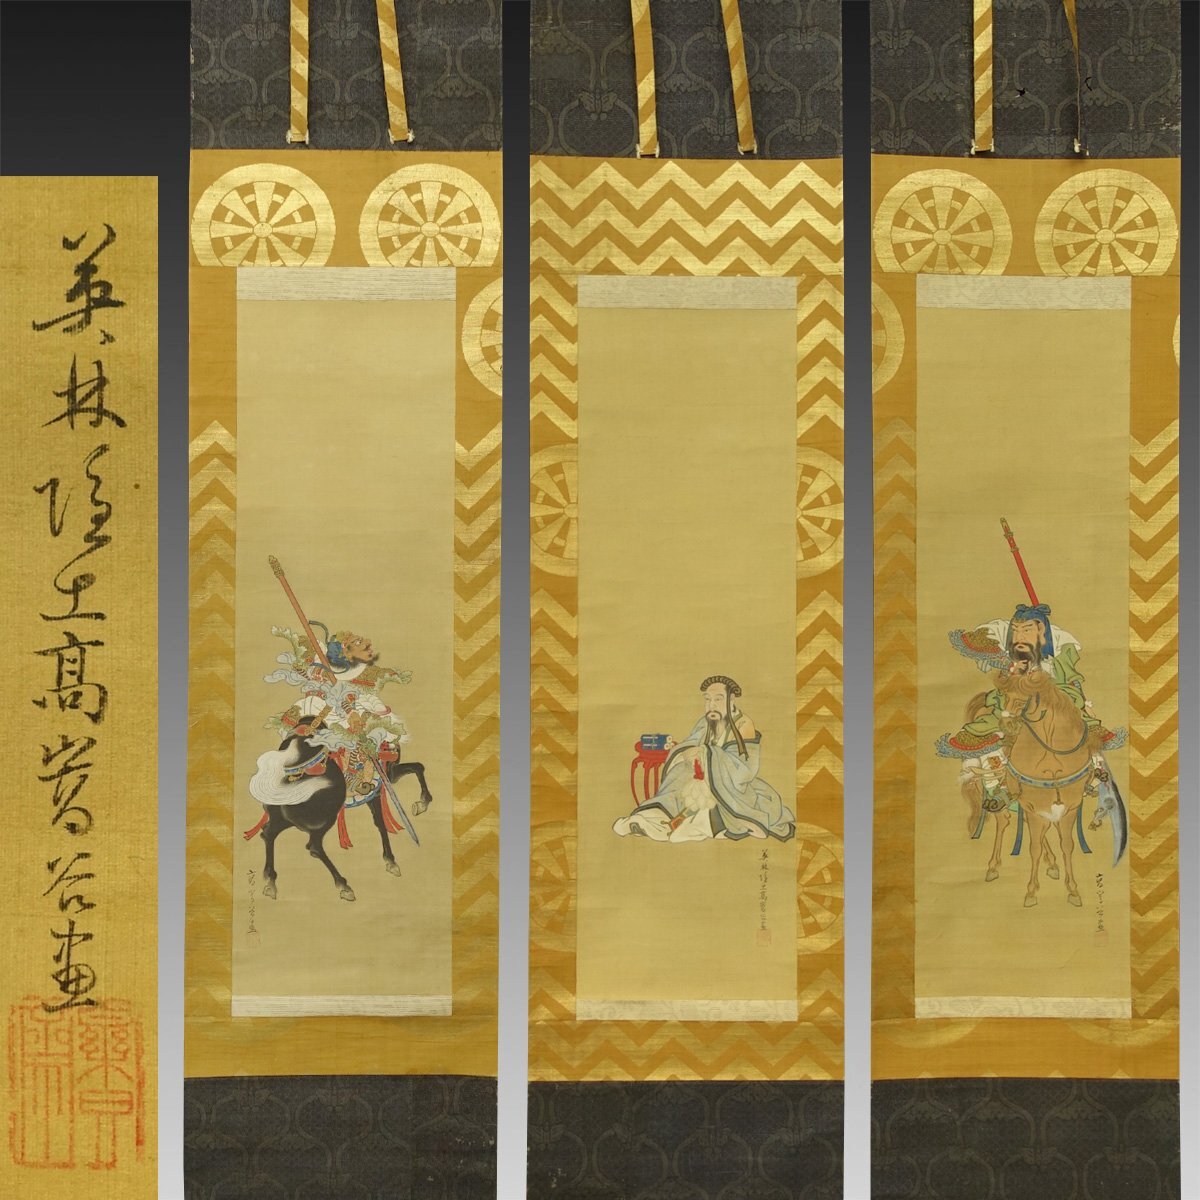 [Authentic work] Kimon ◆ Romance of the Three Kingdoms Chinese Figure Paintings (Liu Bei, Guan Yu, Zhang Fei) Sanbaku Pair Old Hands Old Documents Old Books Japanese Paintings Chinese Warlords Chinese Paintings Tea Ceremony Mid-Edo Period, artwork, book, hanging scroll